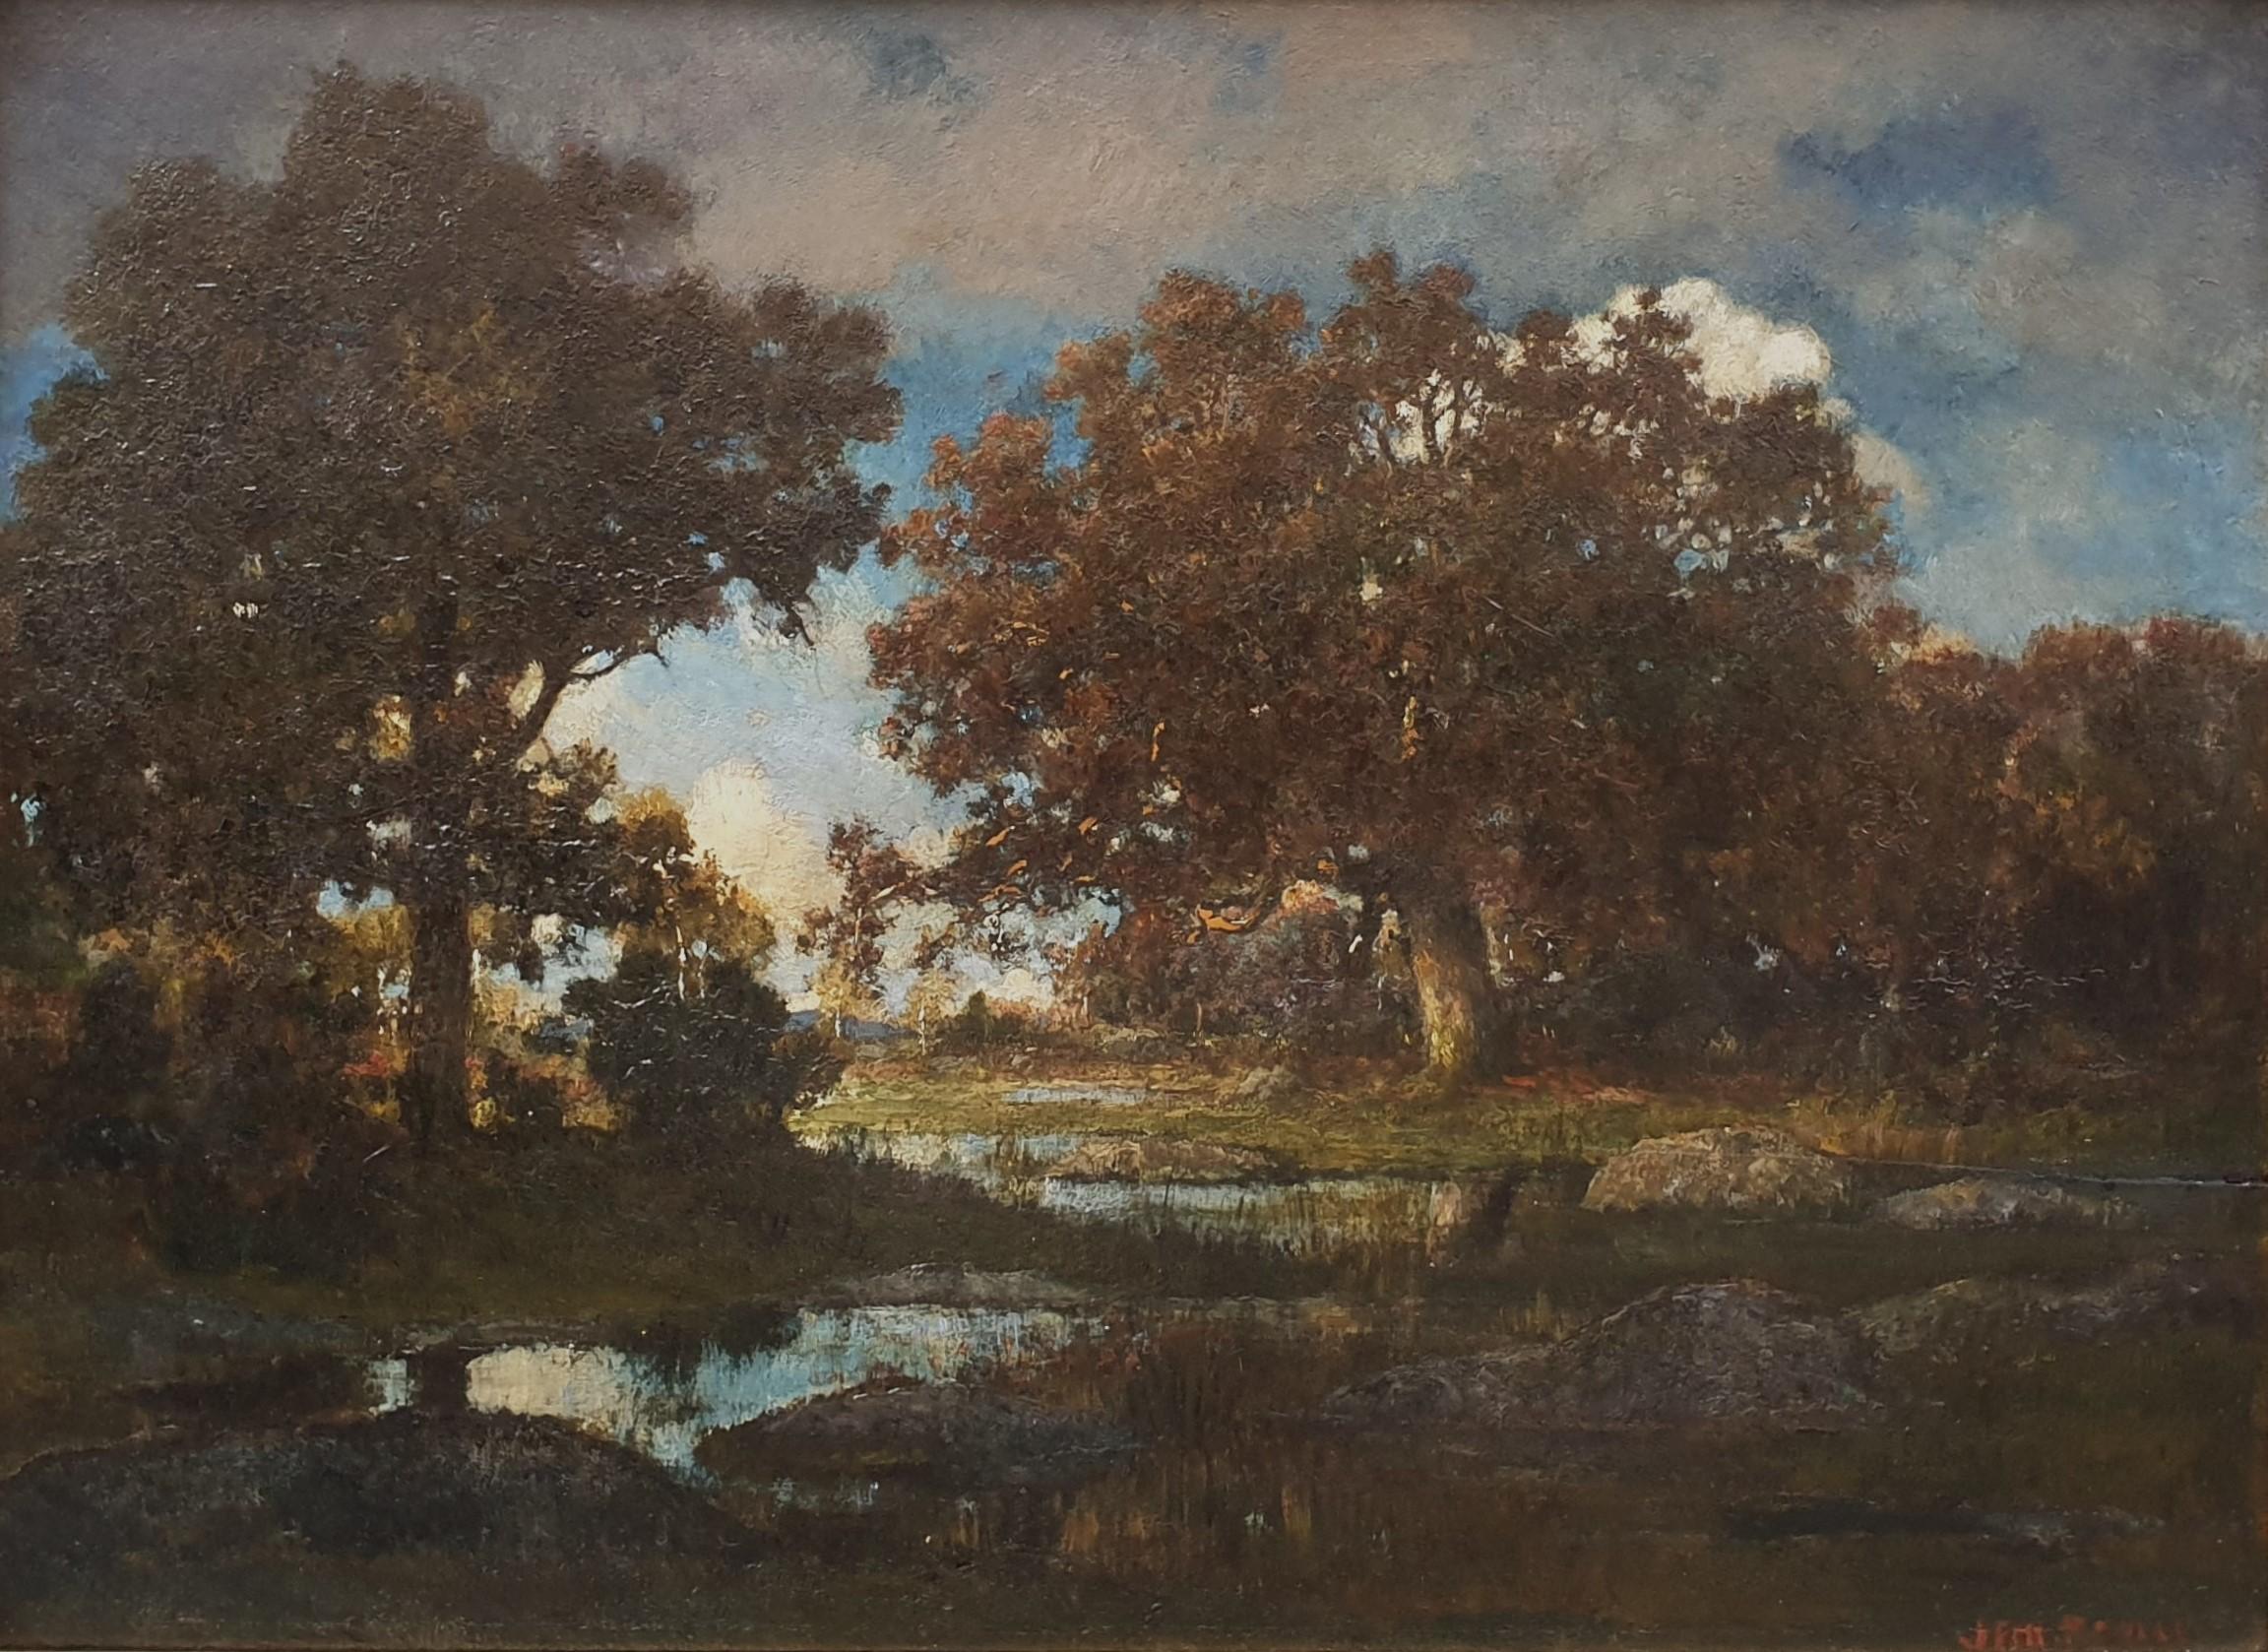 RENIE Barbizon Painting Fontainebleau landscape forest trees pond French 19th - Brown Landscape Painting by Jean Emile RENIE